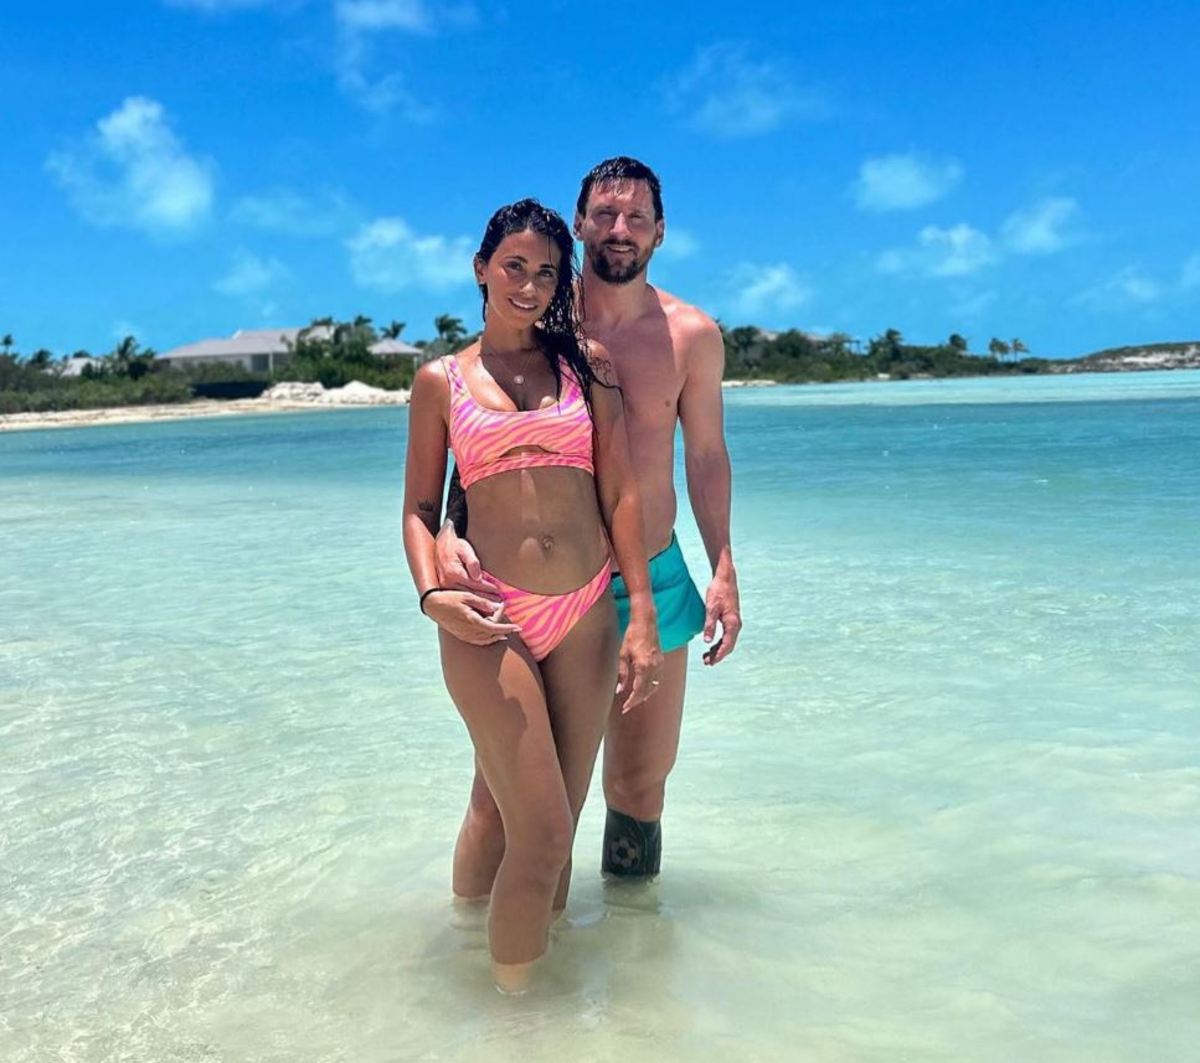 Lionel Messi and wife Antonela Roccuzzo share holiday photos - Futbol on FanNation